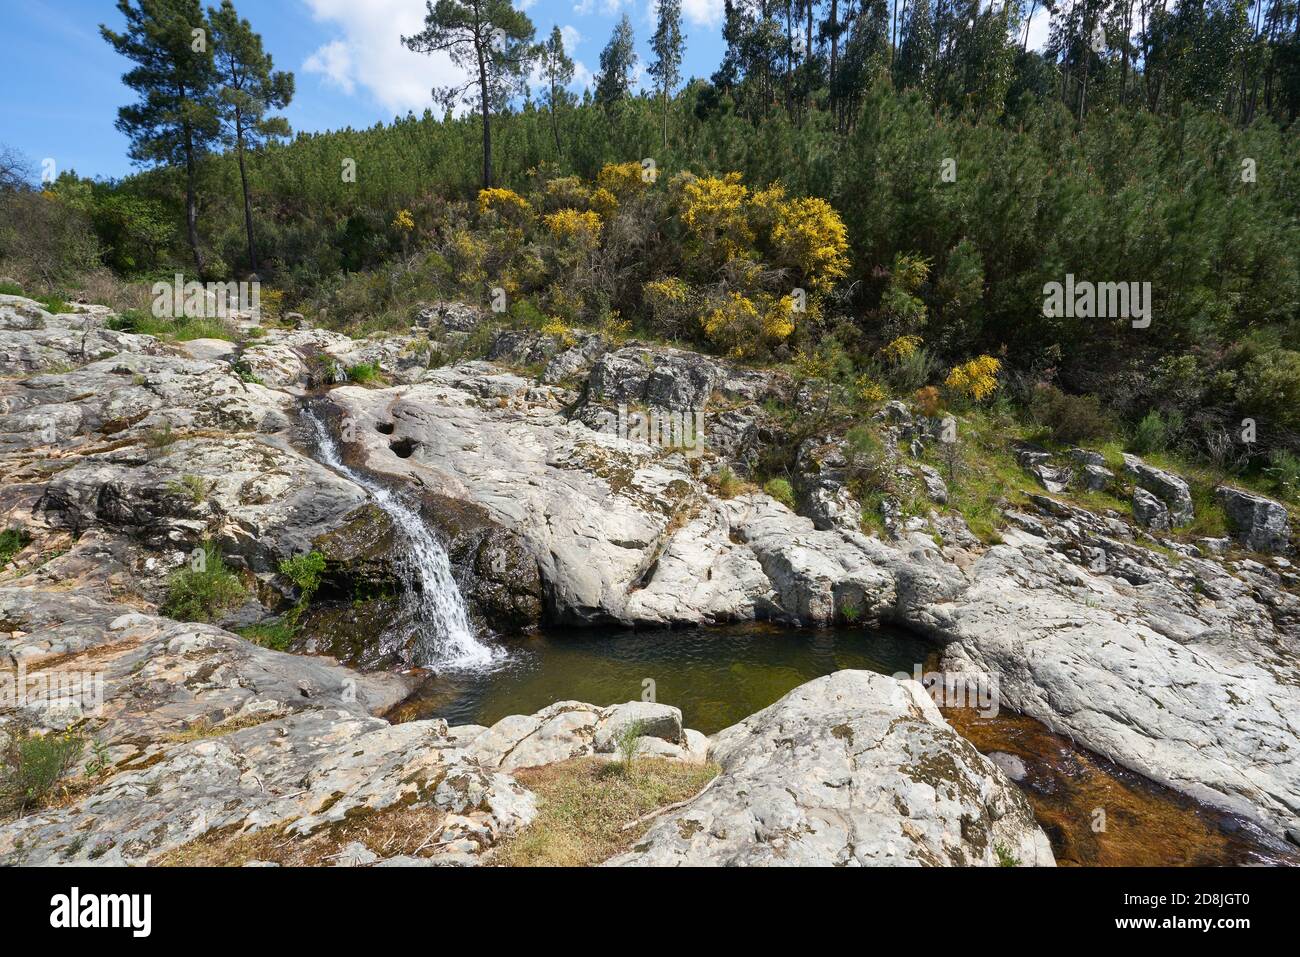 Vila de Rei landscape beautiful nature landscape with waterfalls and green  and yellow trees, in Portugal Stock Photo - Alamy